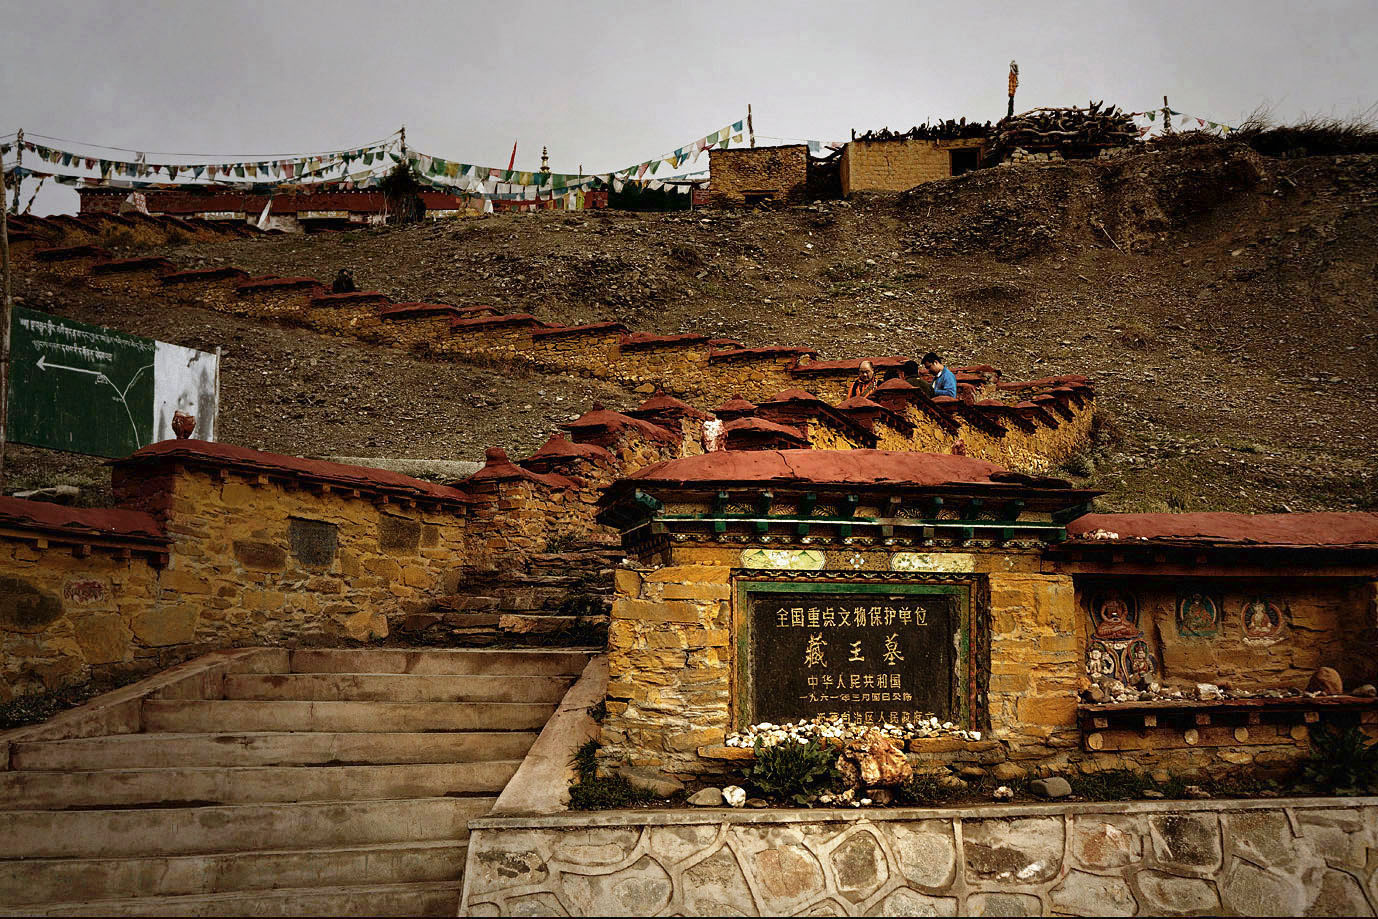 Archaeologists discover 13 ancient tombs in Tibet